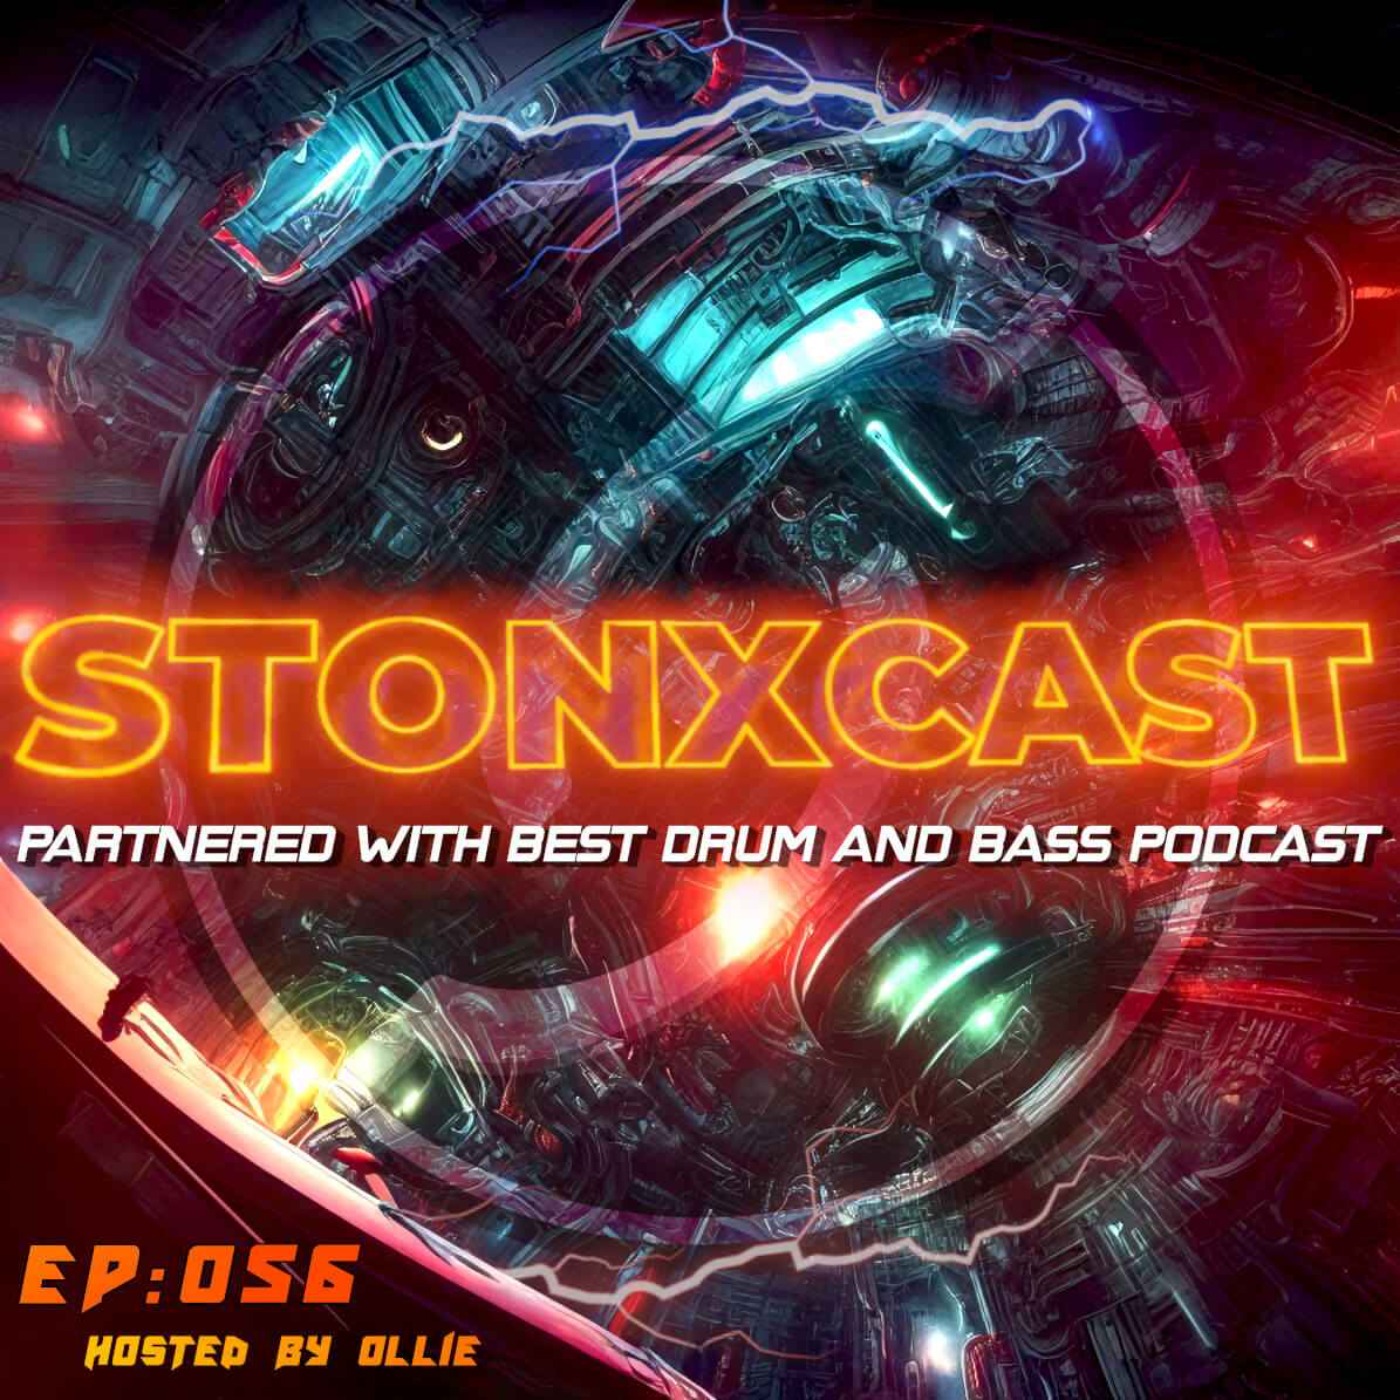 Stonxcast EP:056 - Hosted by Ollie Artwork